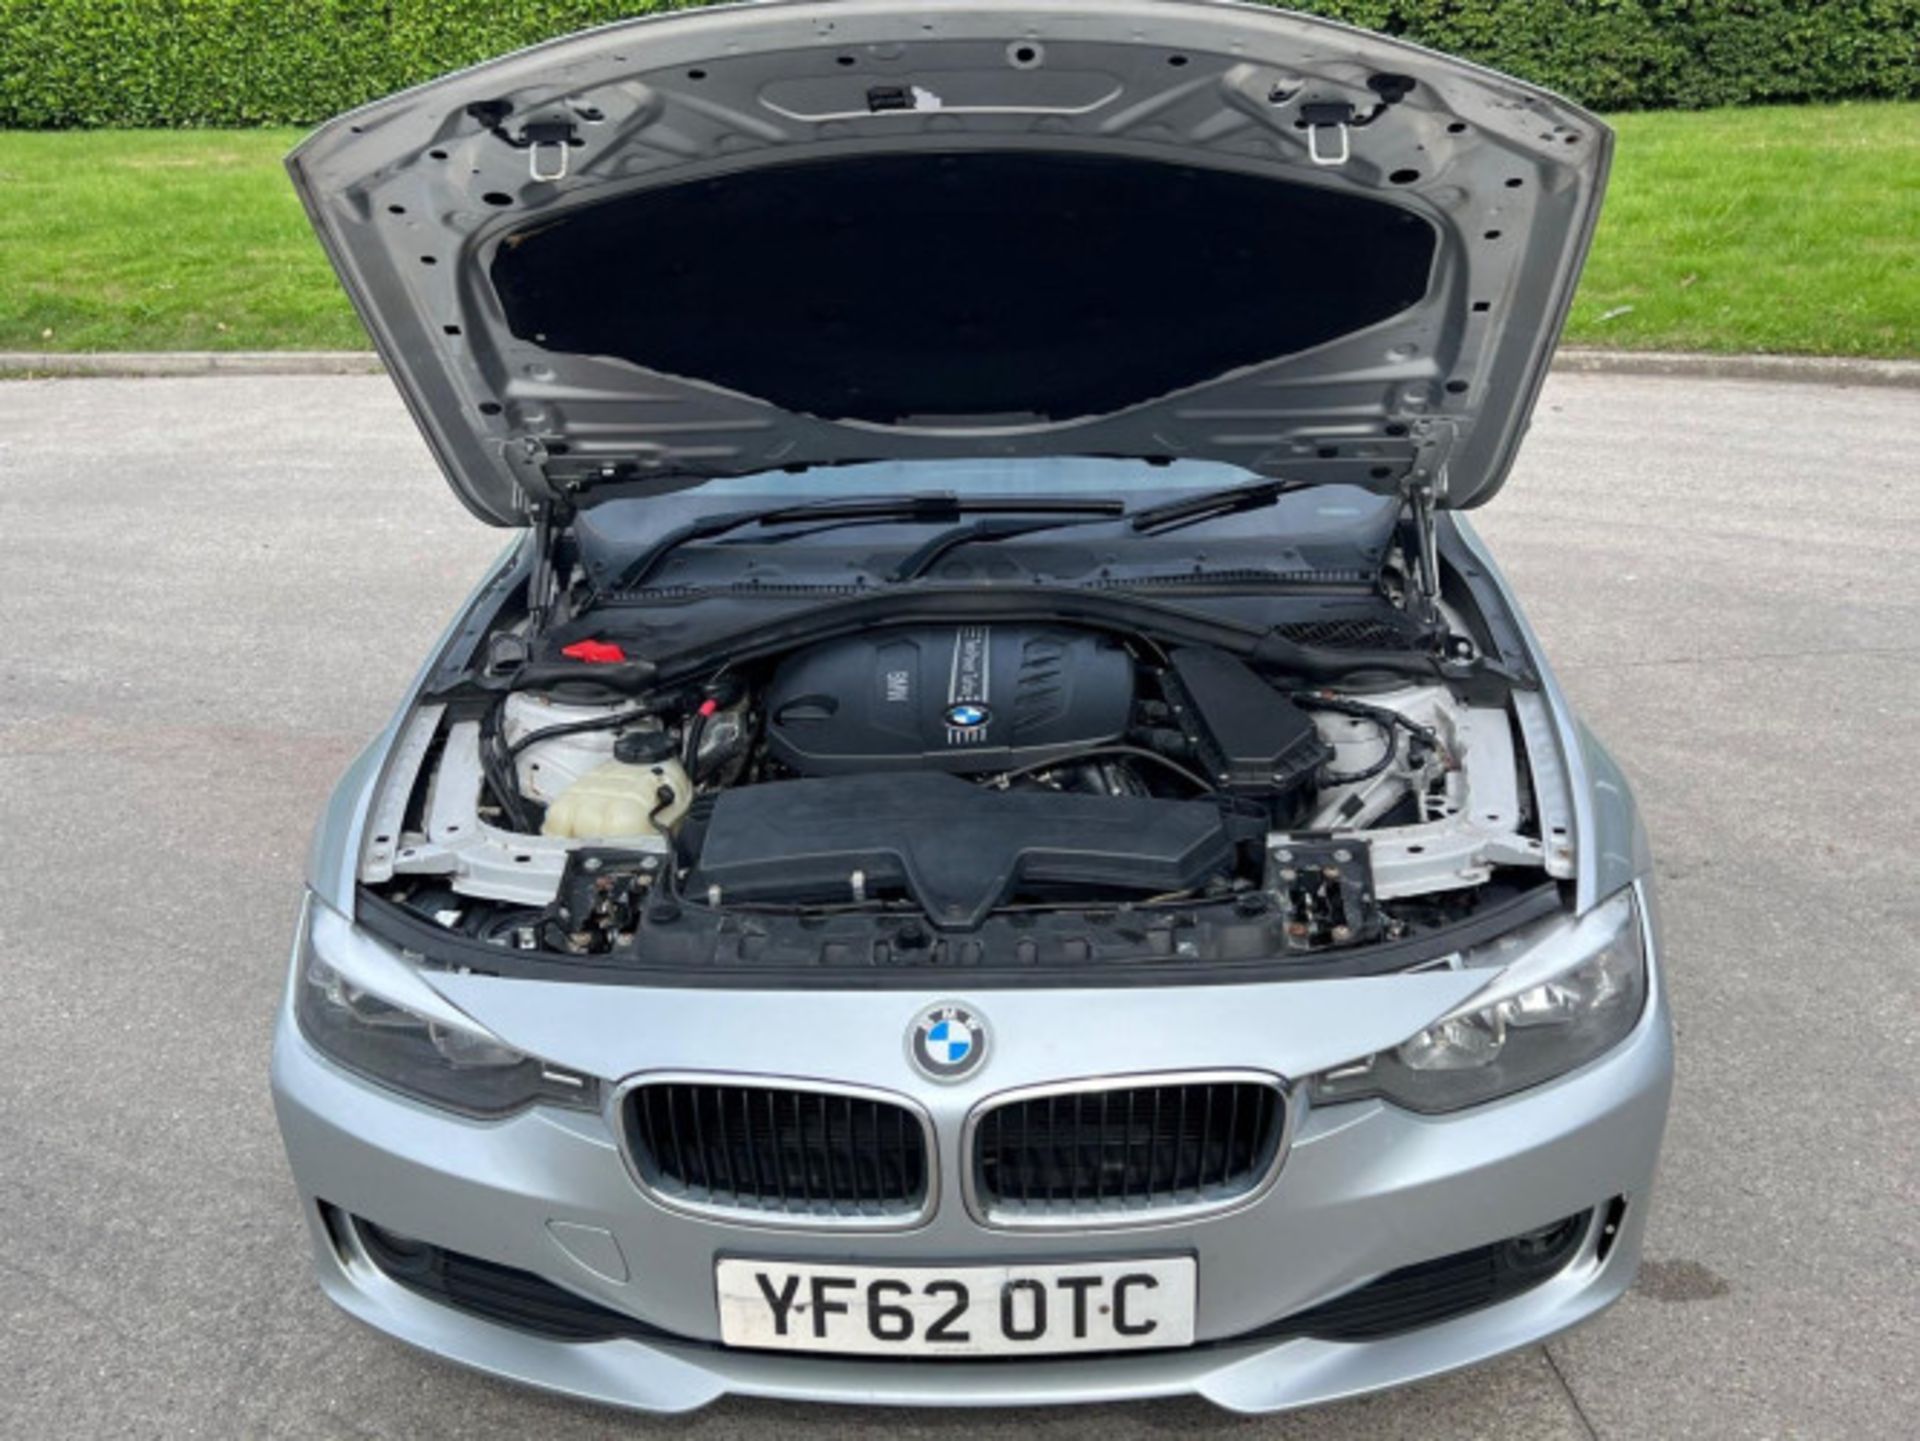 BMW 3 SERIES 2.0 DIESEL ED START STOP - A WELL-MAINTAINED GEM >>--NO VAT ON HAMMER--<< - Image 15 of 229